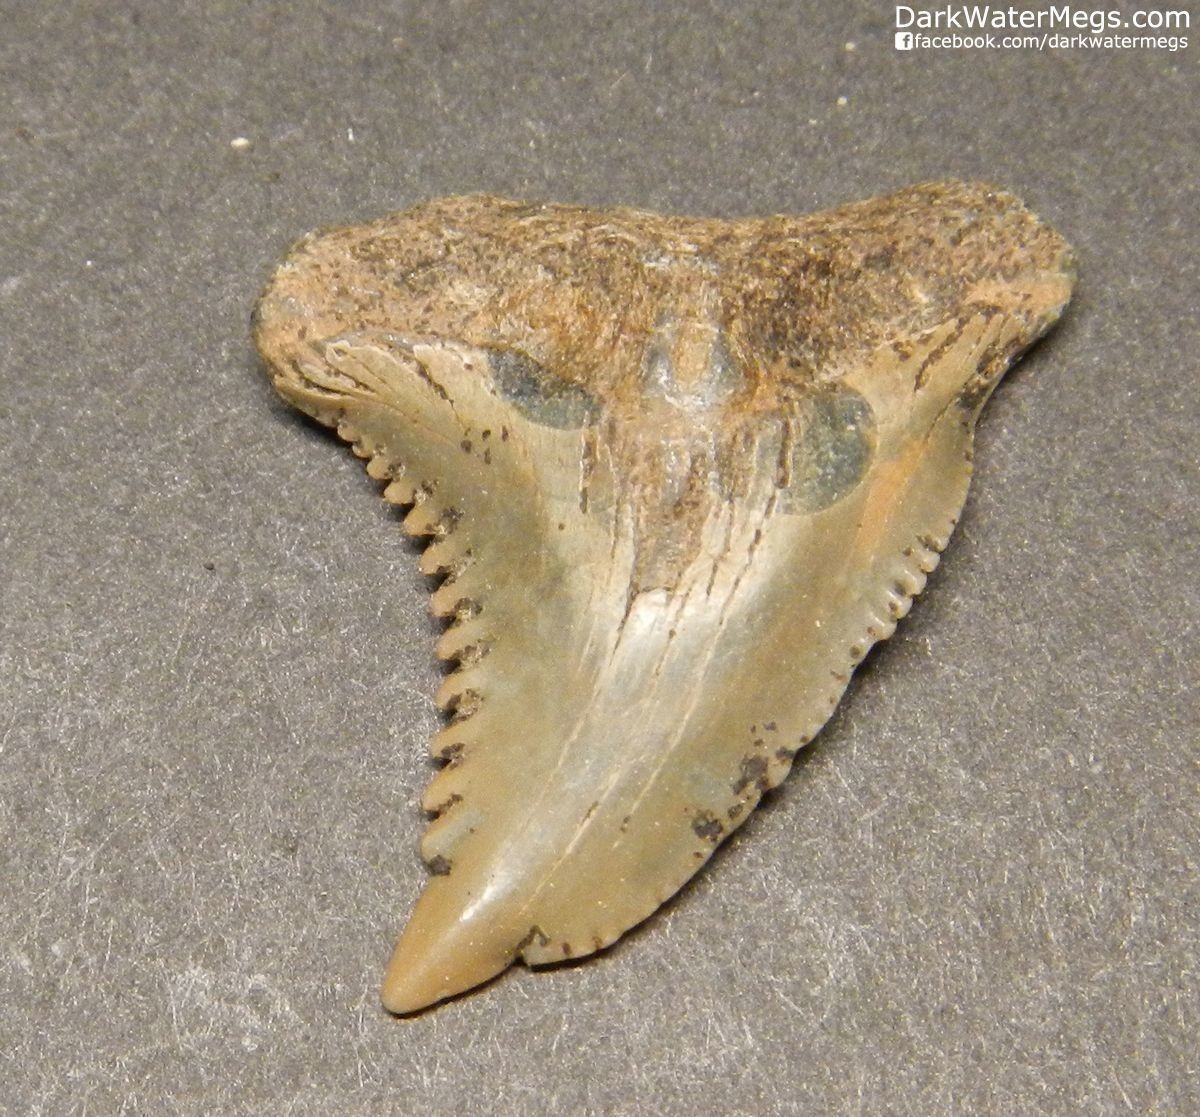 1.03" SmallHemipristis or "snaggle" fossil shark tooth